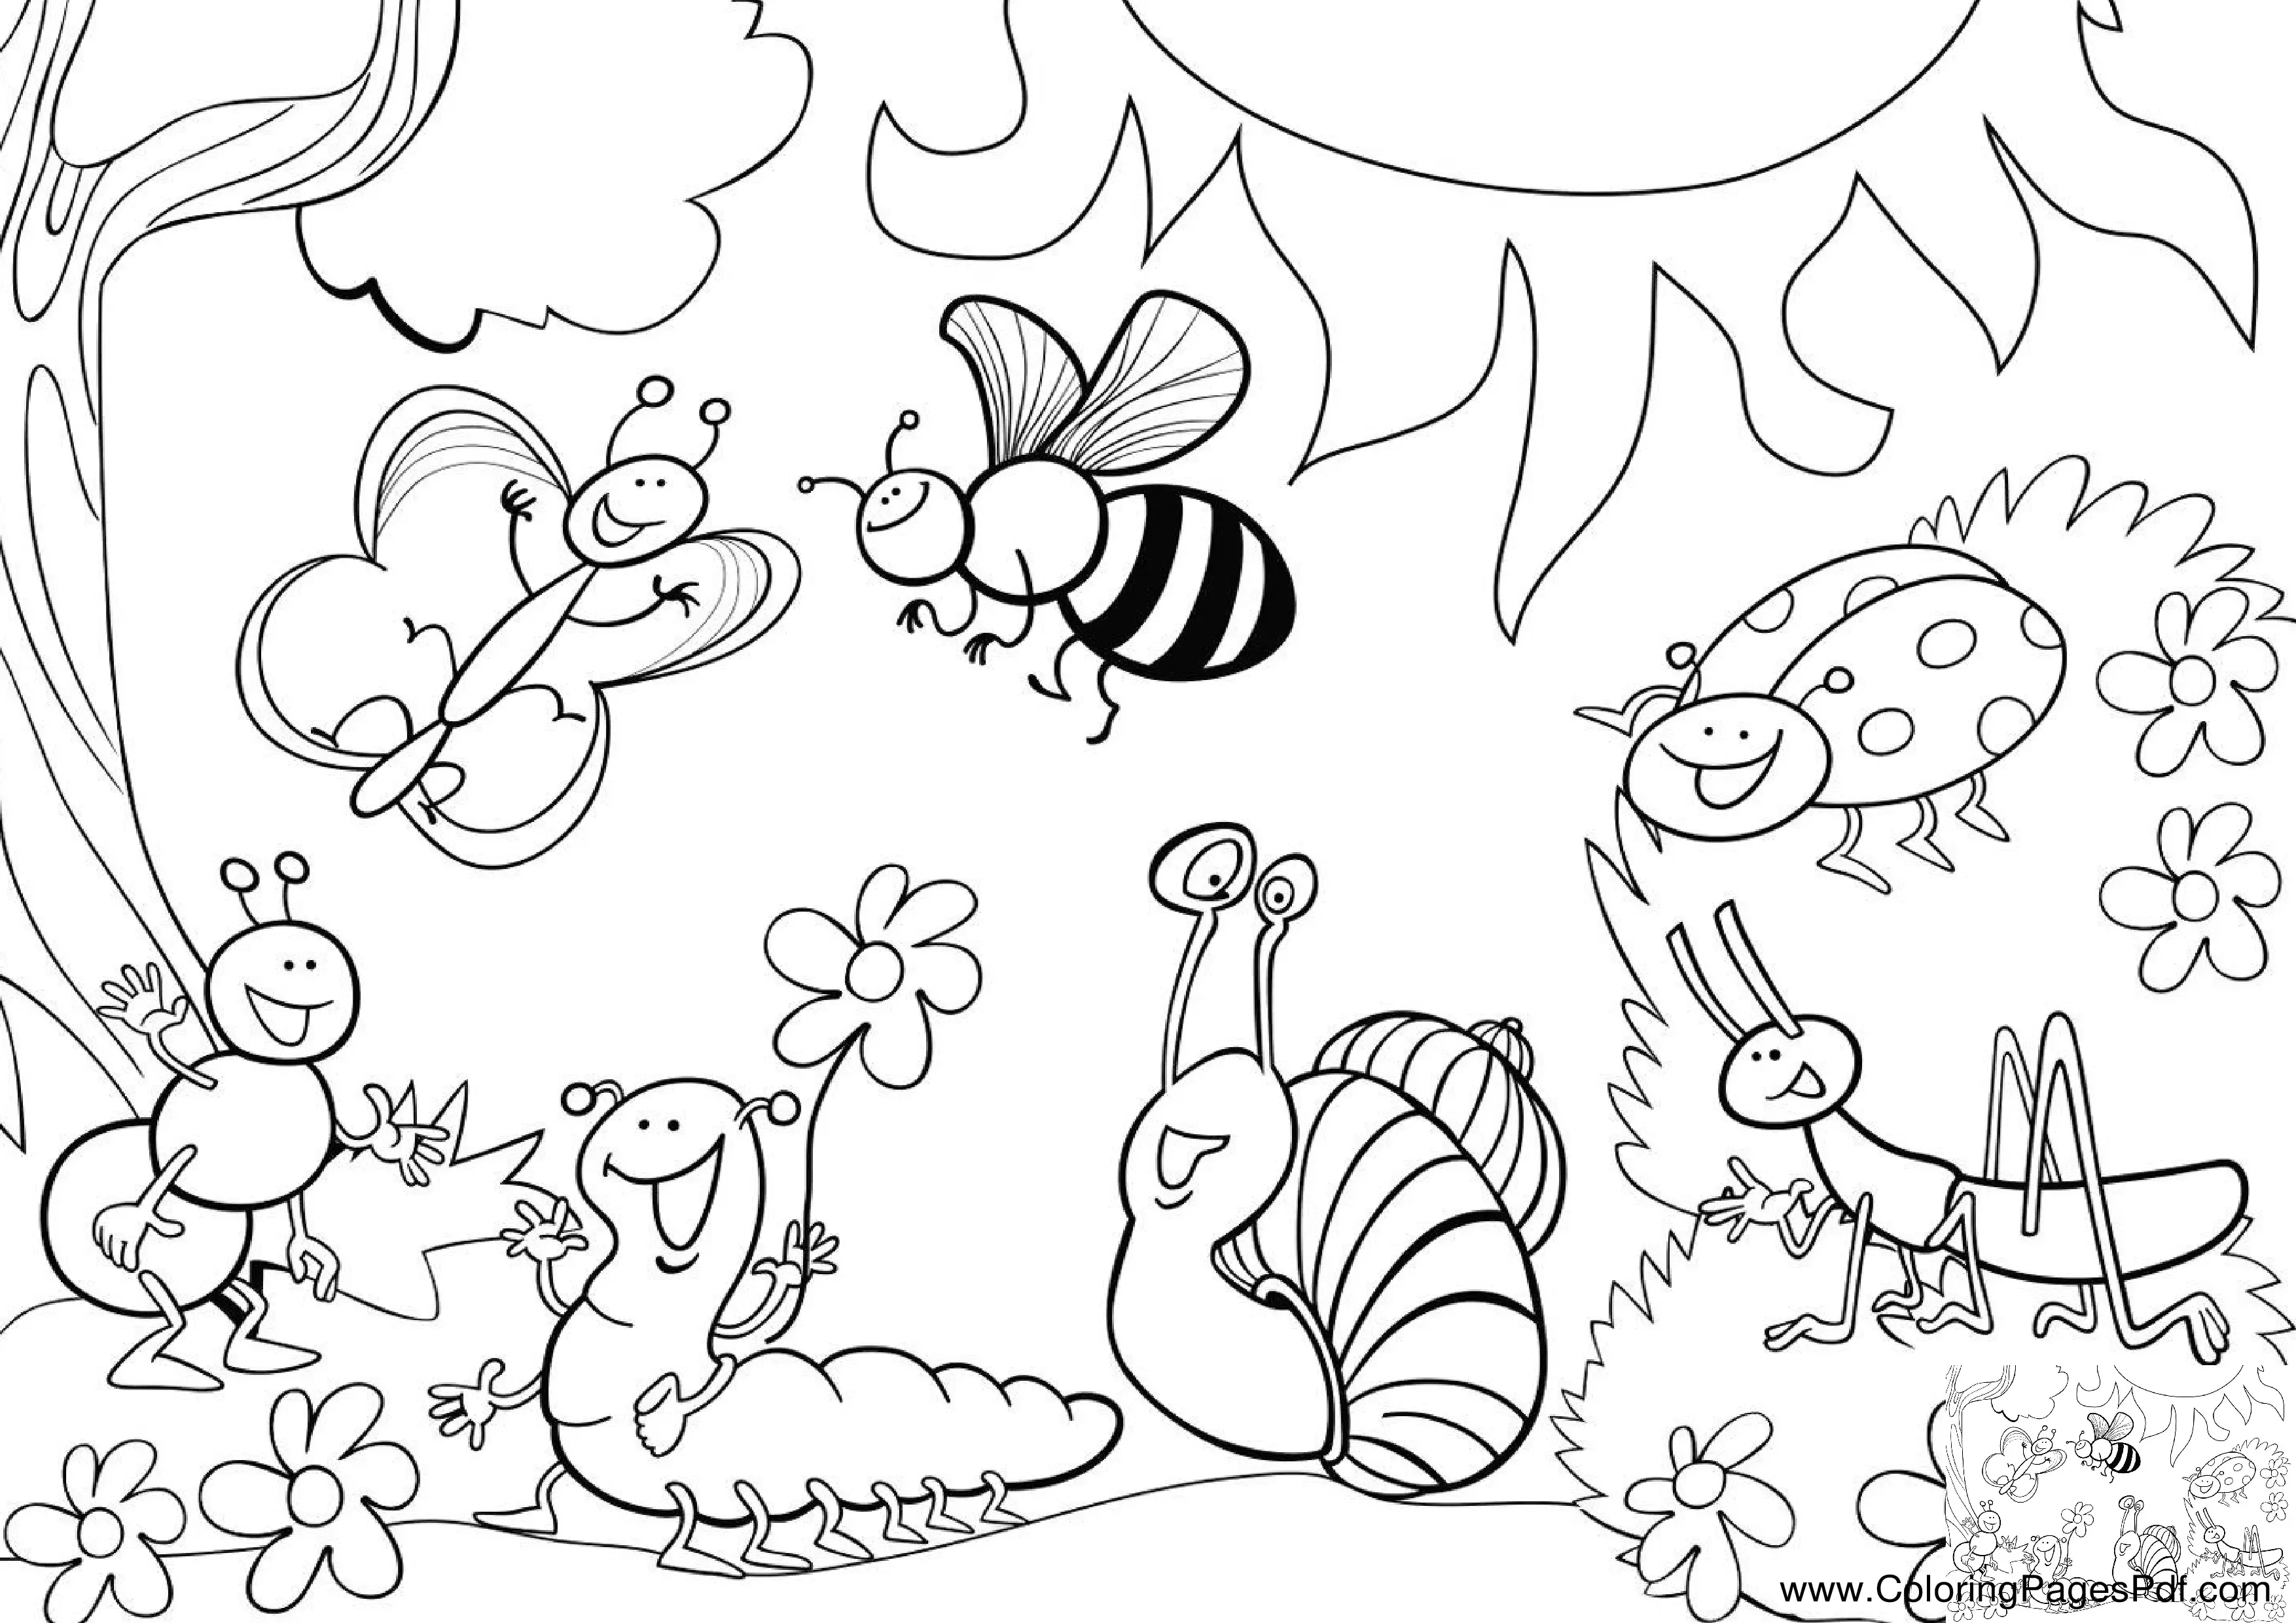 Coloring Pages for kids pdf